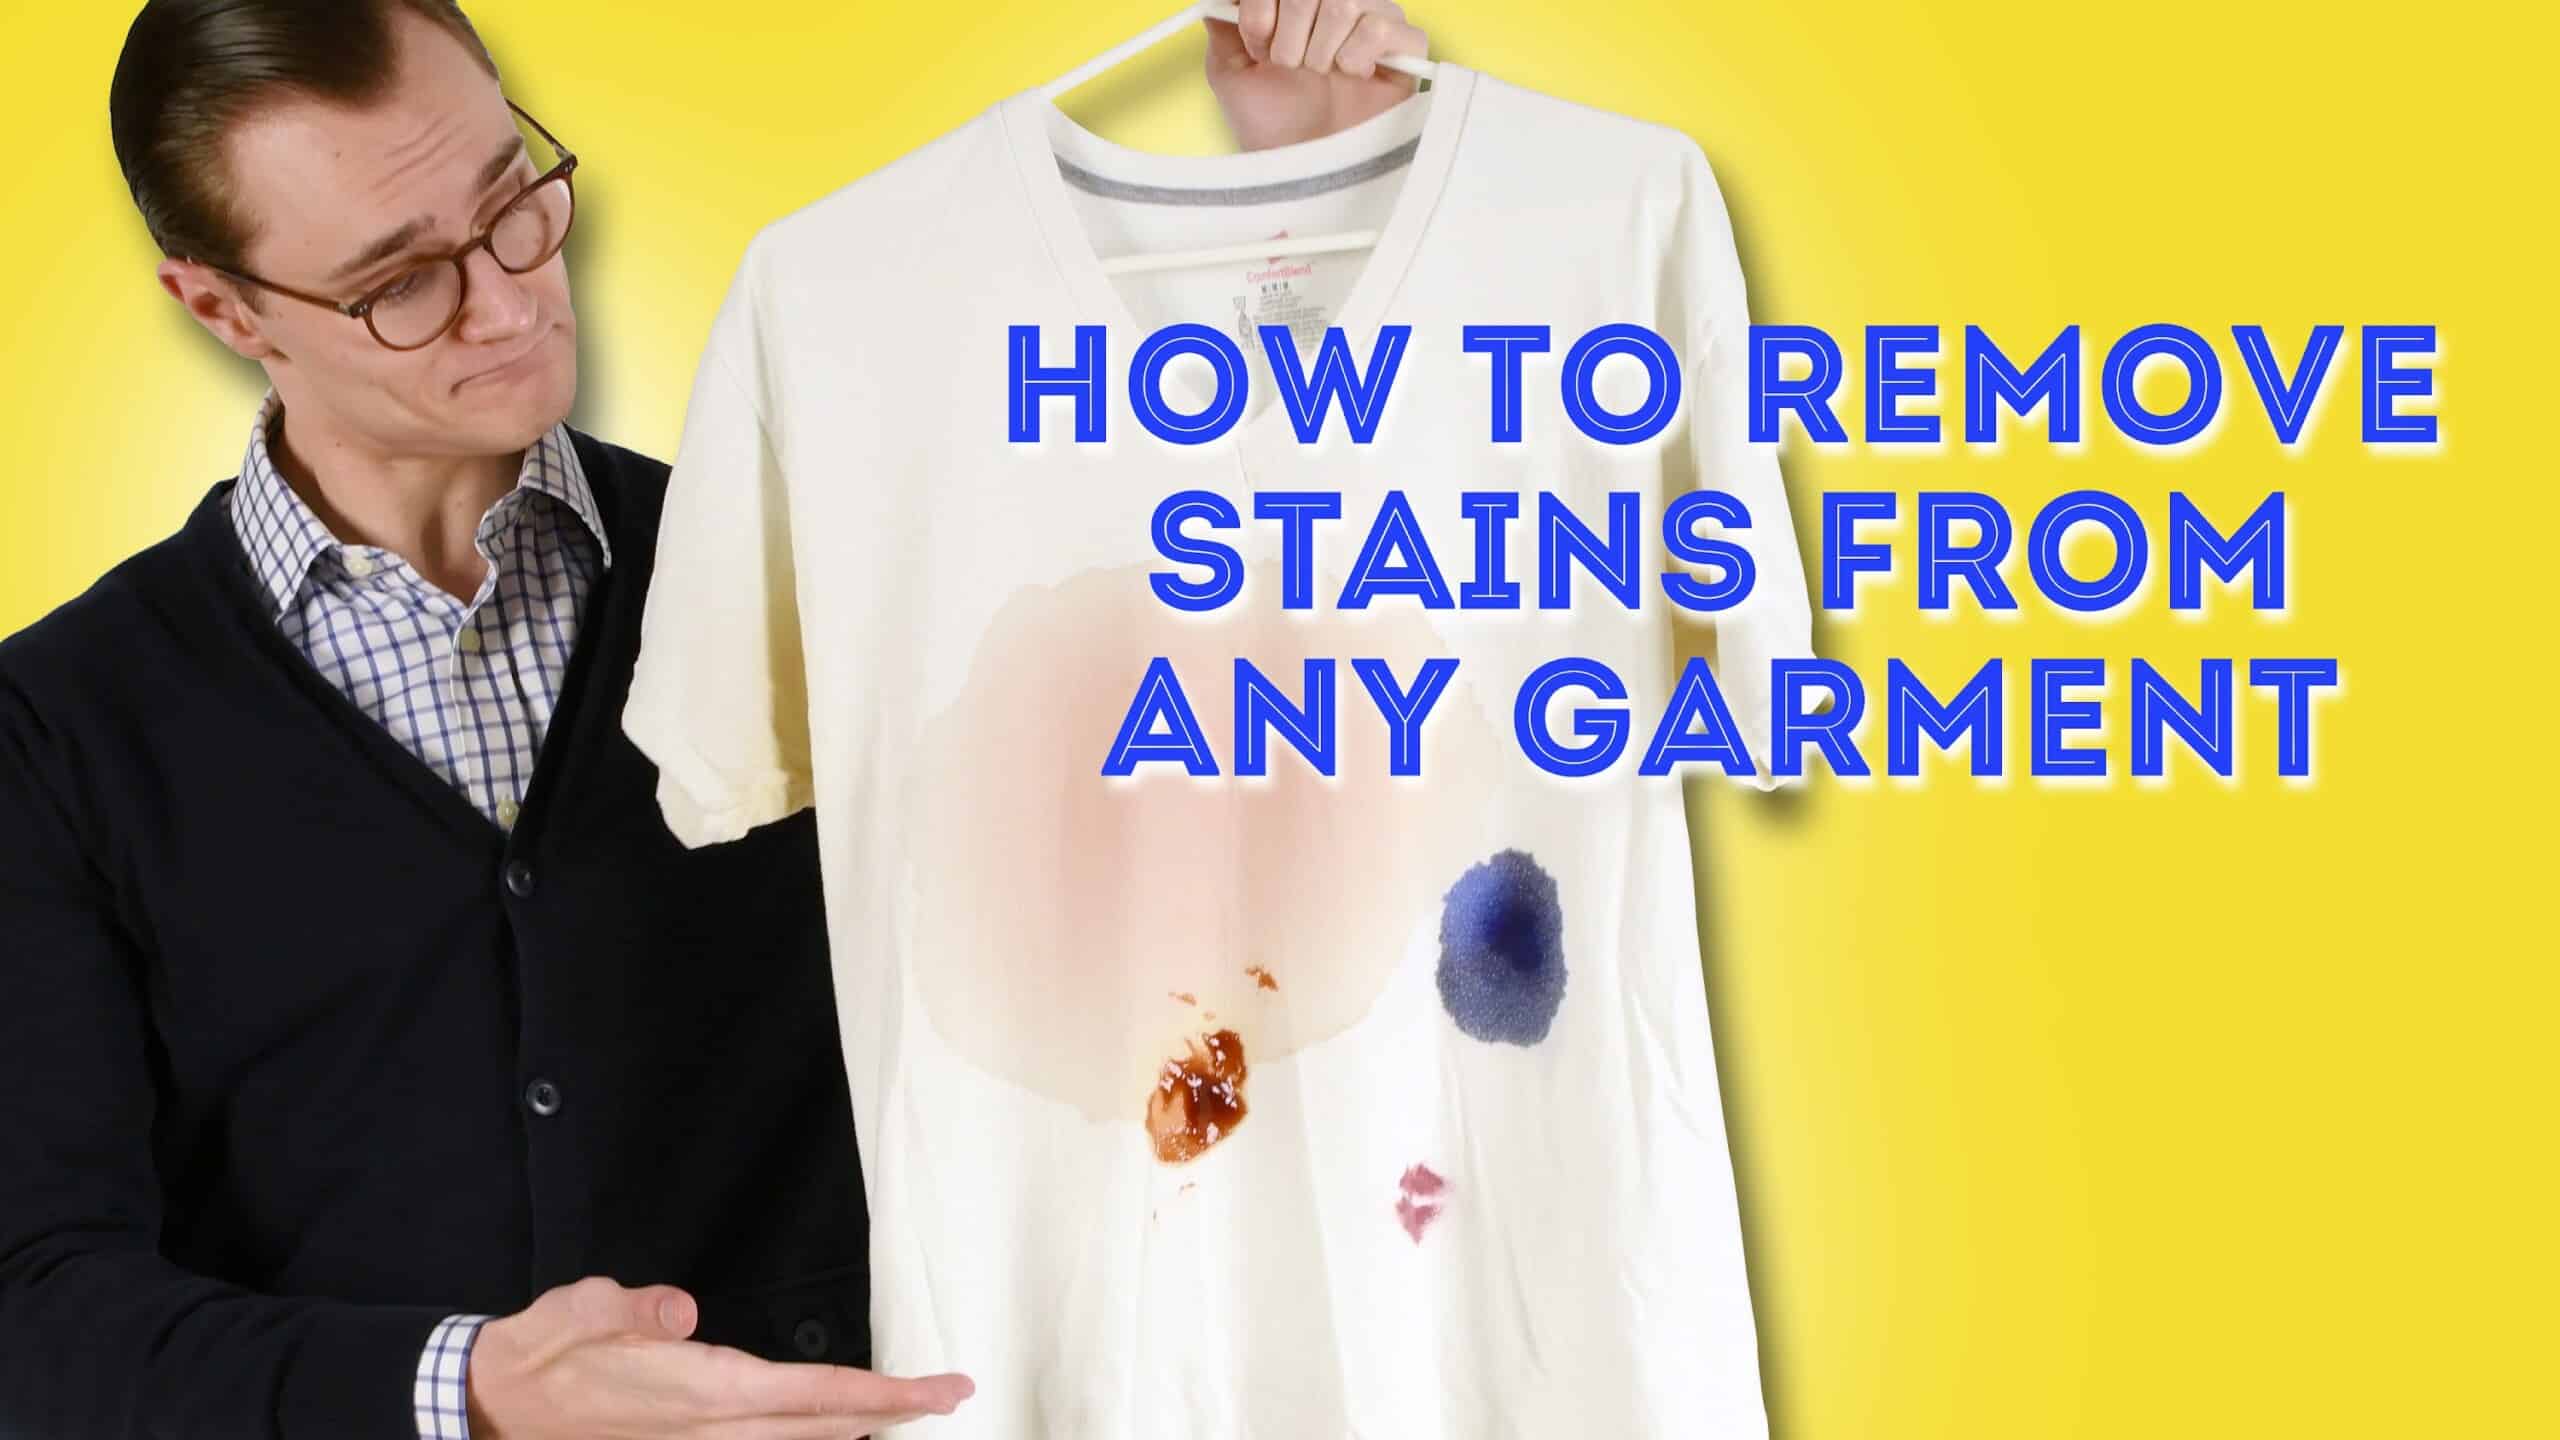 How to Get Stains Out of a White Shirt Easily